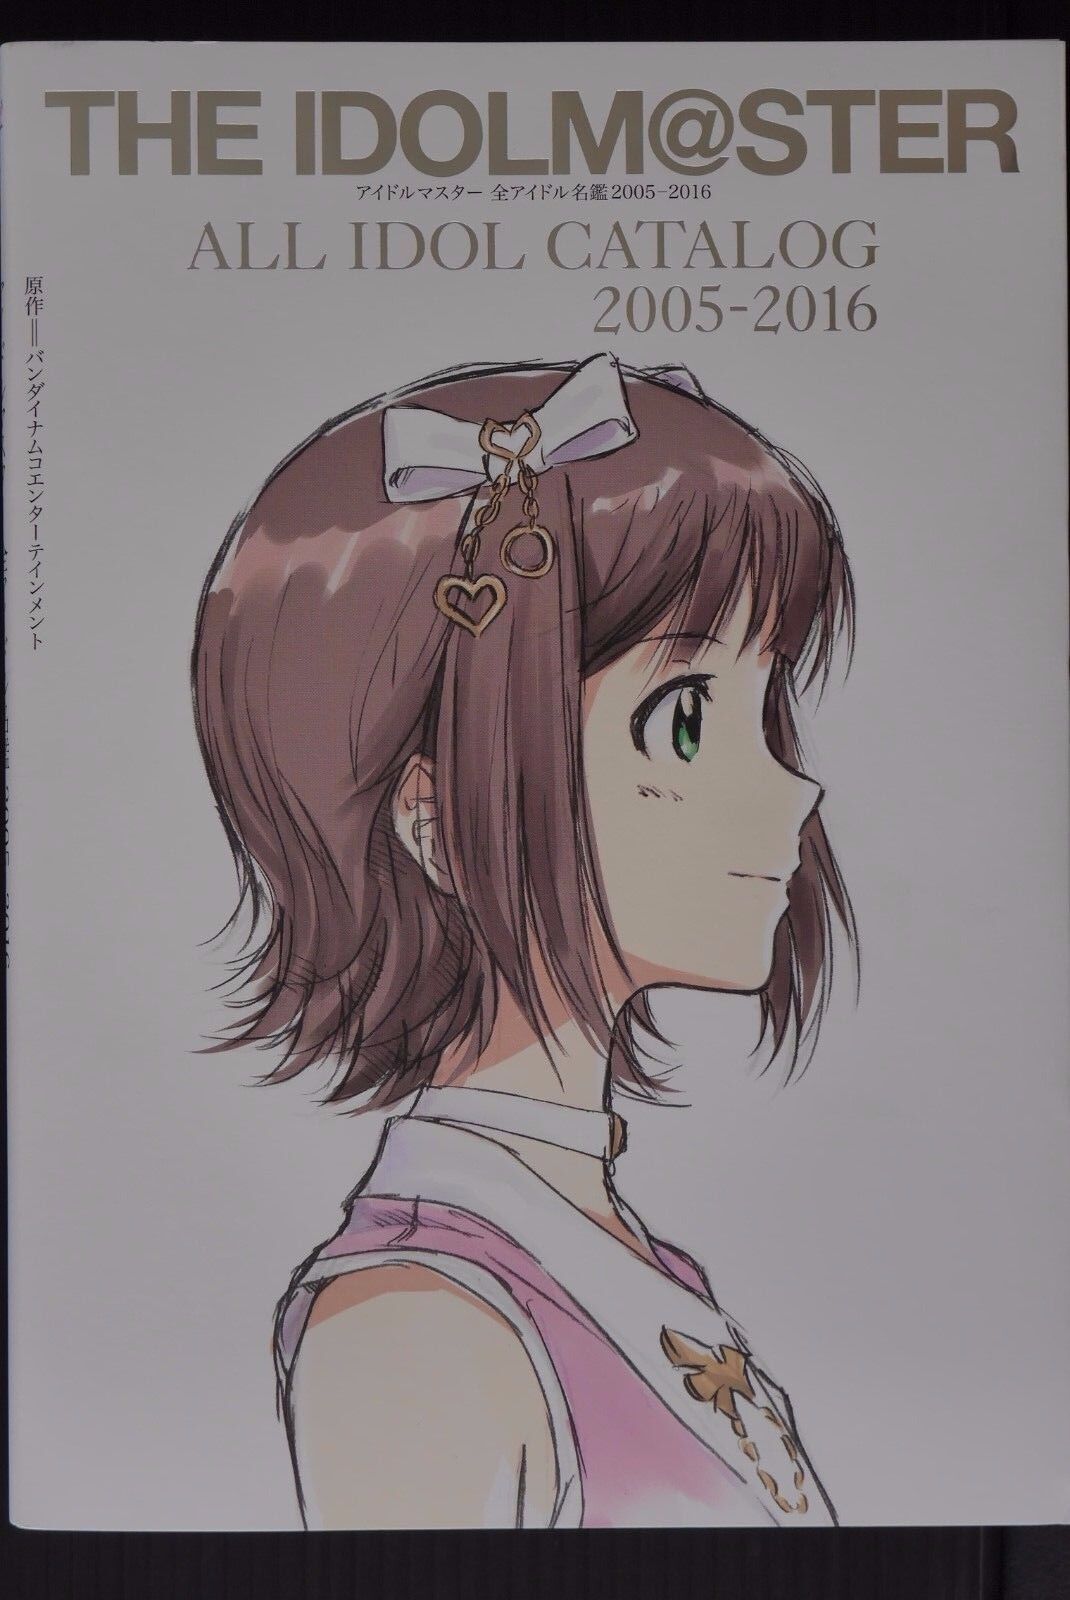 The Idolmaster All Idol Catalog 2005-2016 - Book from JAPAN